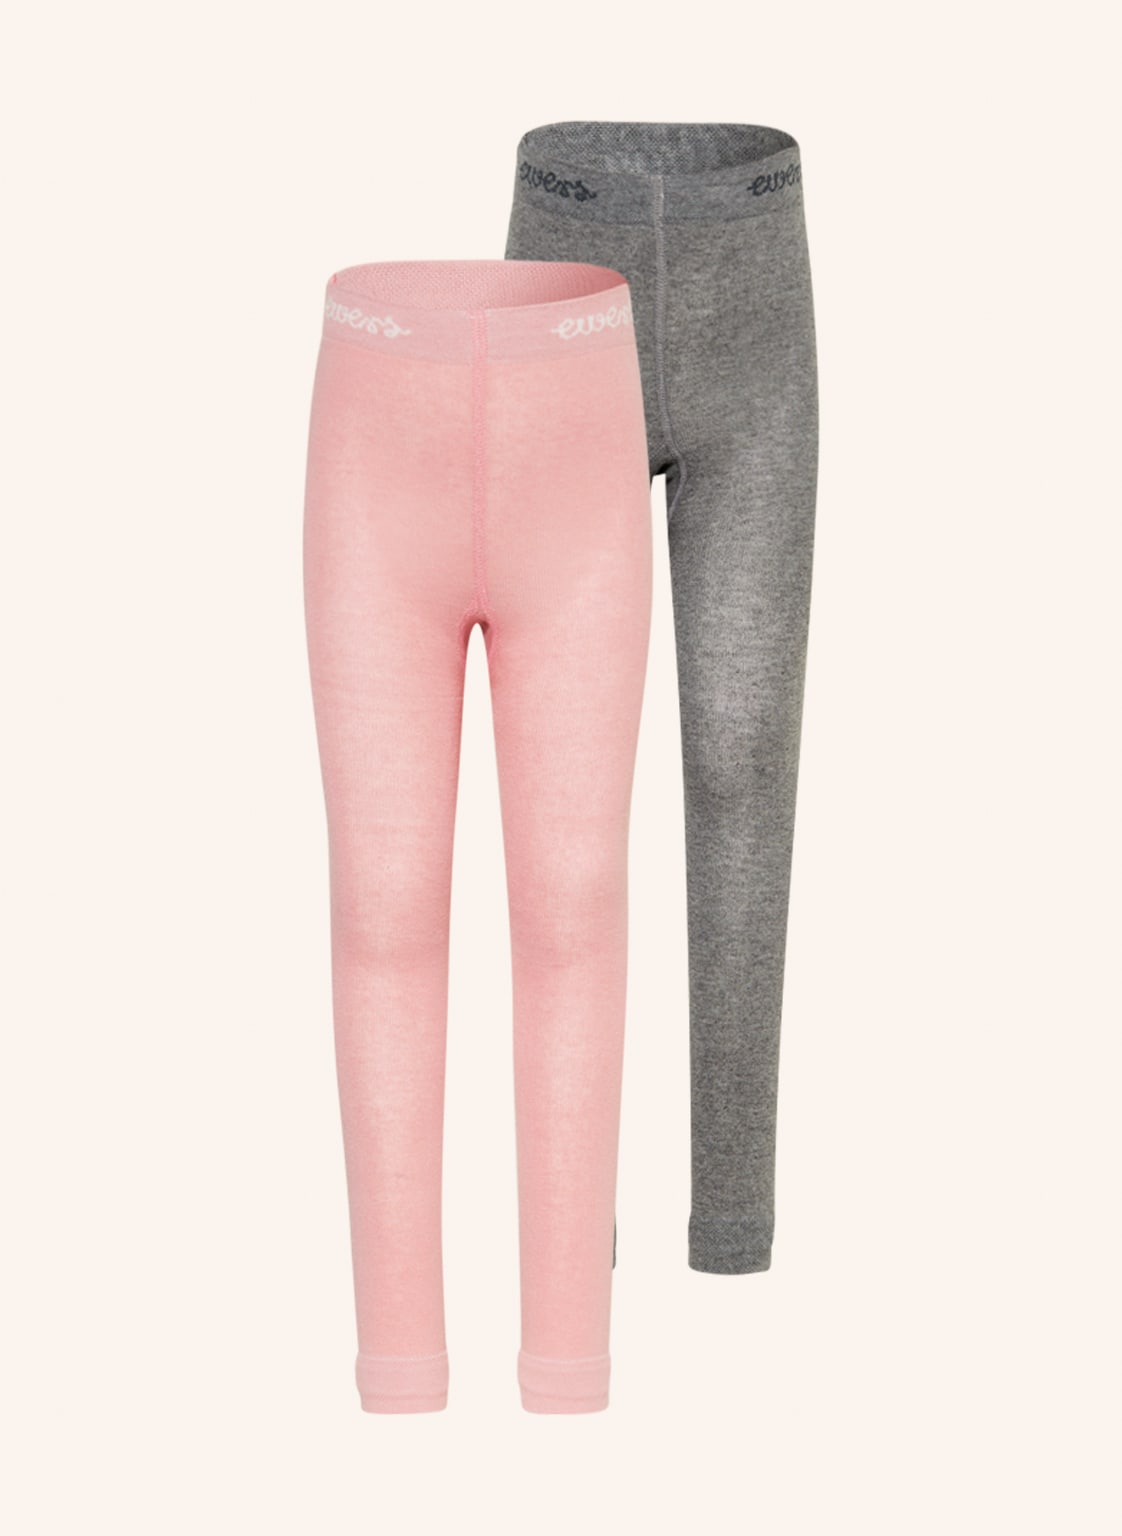 Ewers Collection 2er-Pack Leggings blau von ewers COLLECTION